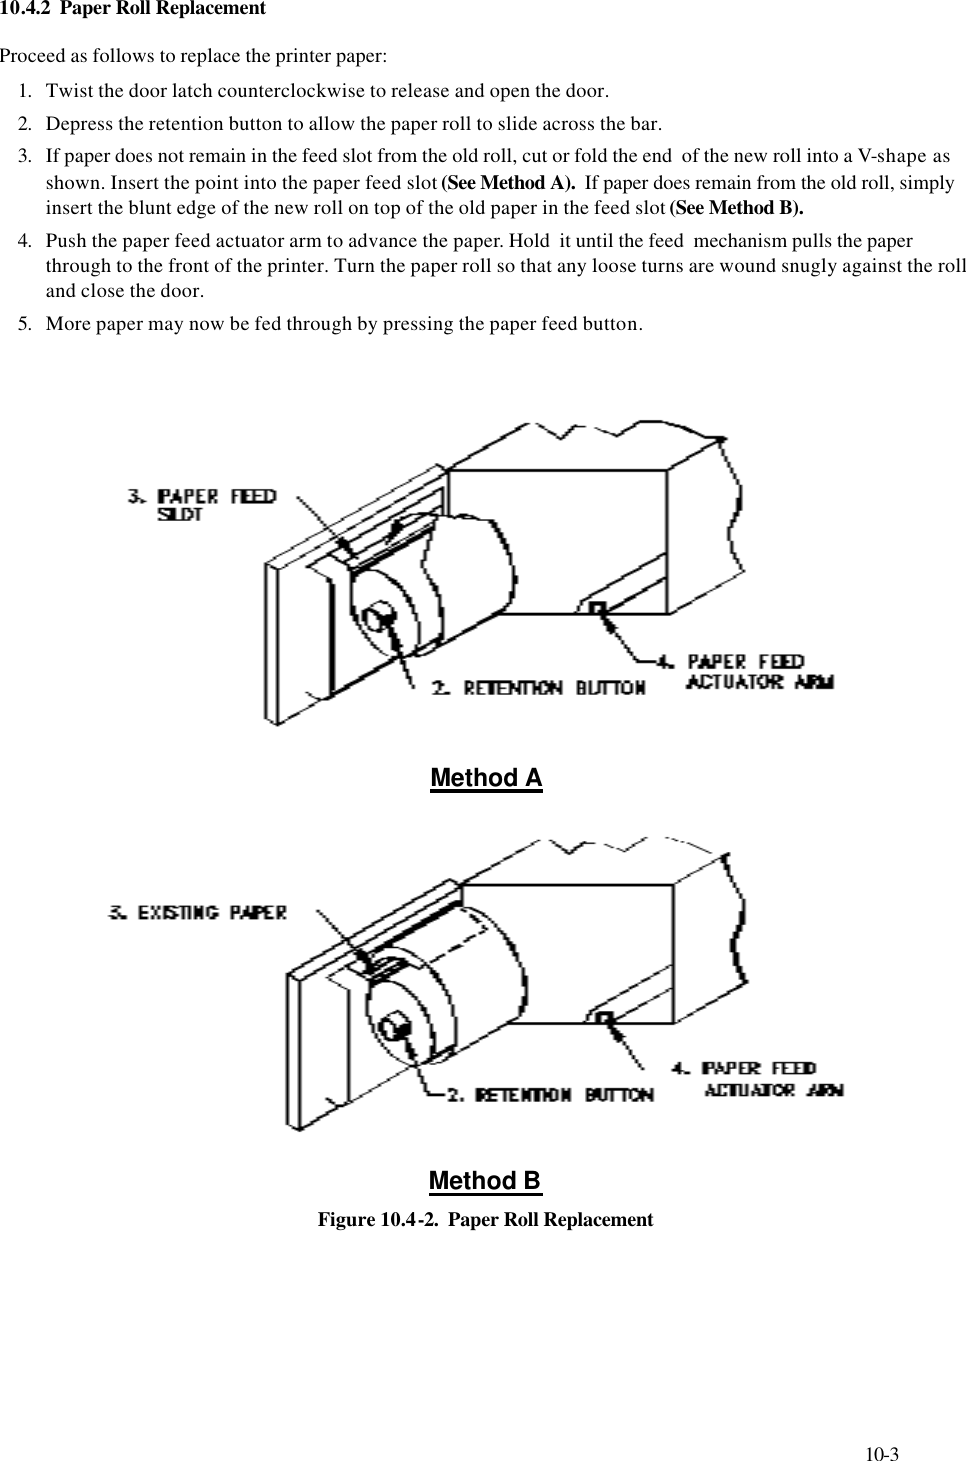     10-3 10.4.2  Paper Roll Replacement   Proceed as follows to replace the printer paper: 1. Twist the door latch counterclockwise to release and open the door. 2. Depress the retention button to allow the paper roll to slide across the bar. 3. If paper does not remain in the feed slot from the old roll, cut or fold the end  of the new roll into a V-shape as shown. Insert the point into the paper feed slot (See Method A).  If paper does remain from the old roll, simply insert the blunt edge of the new roll on top of the old paper in the feed slot (See Method B). 4. Push the paper feed actuator arm to advance the paper. Hold  it until the feed  mechanism pulls the paper through to the front of the printer. Turn the paper roll so that any loose turns are wound snugly against the roll and close the door. 5. More paper may now be fed through by pressing the paper feed button.         Method A  Method B Figure 10.4-2.  Paper Roll Replacement 